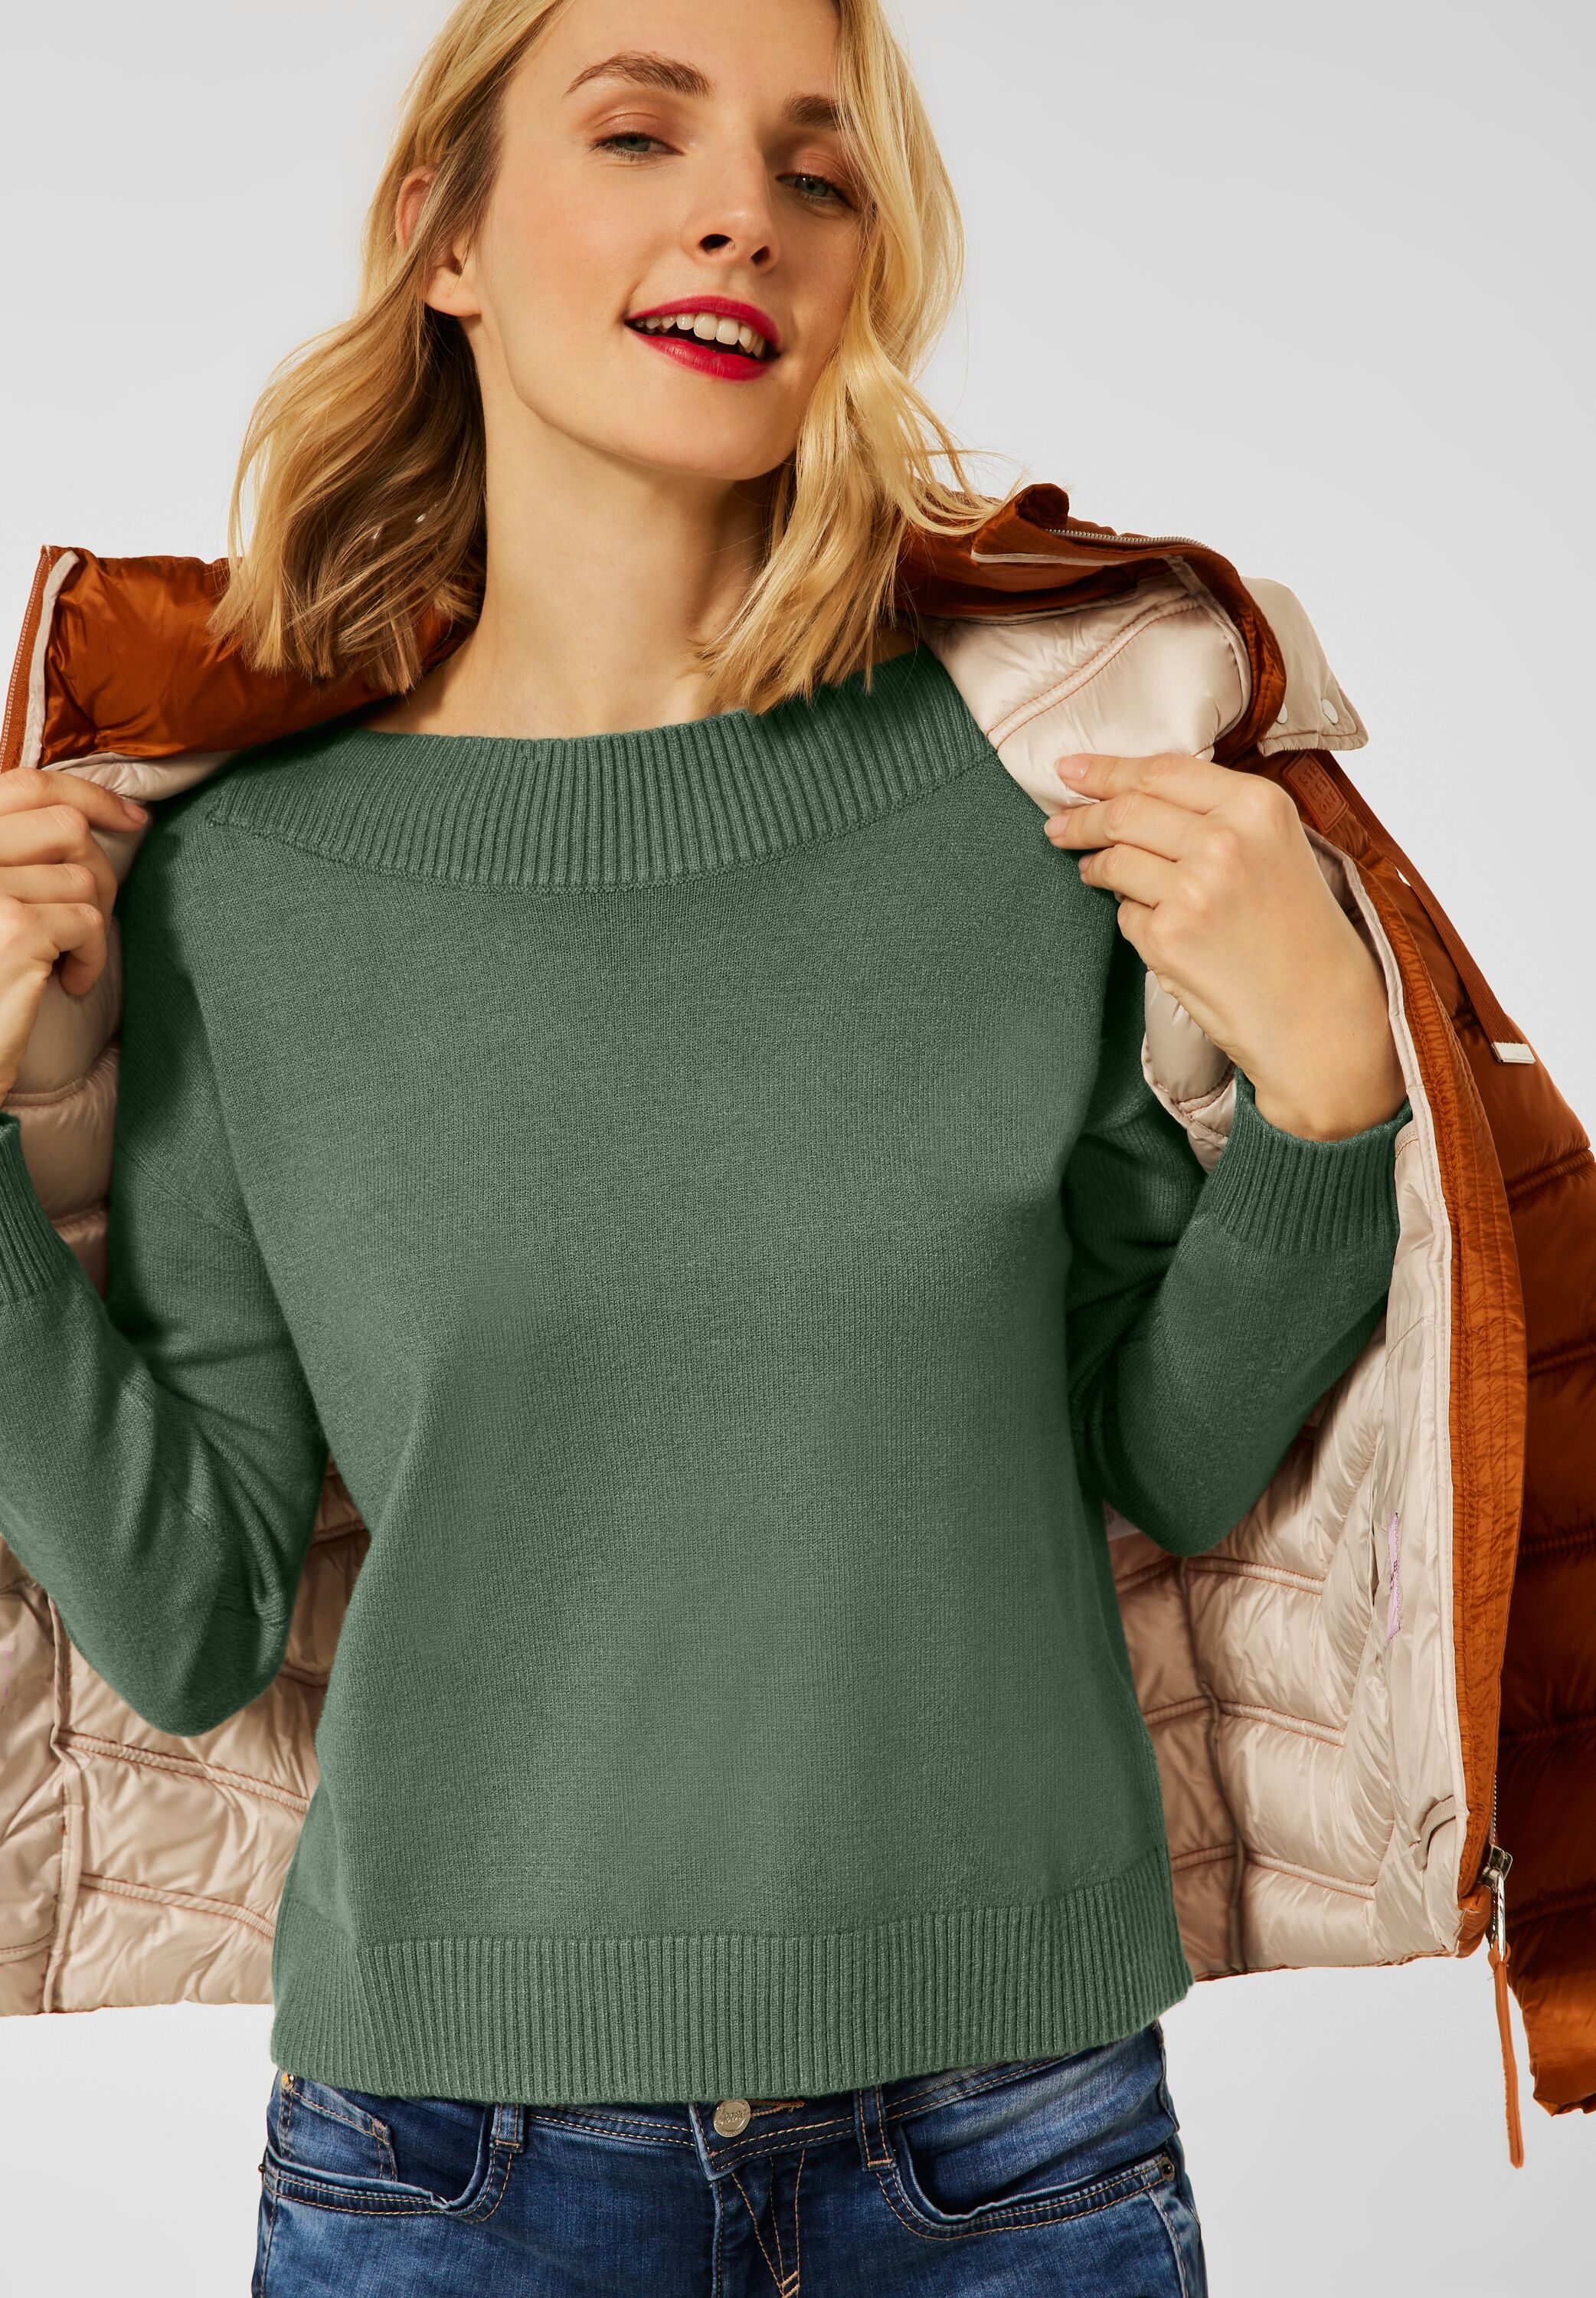 Street One Pullover in Frosty Green im SALE reduziert A301352-13389 -  CONCEPT Mode